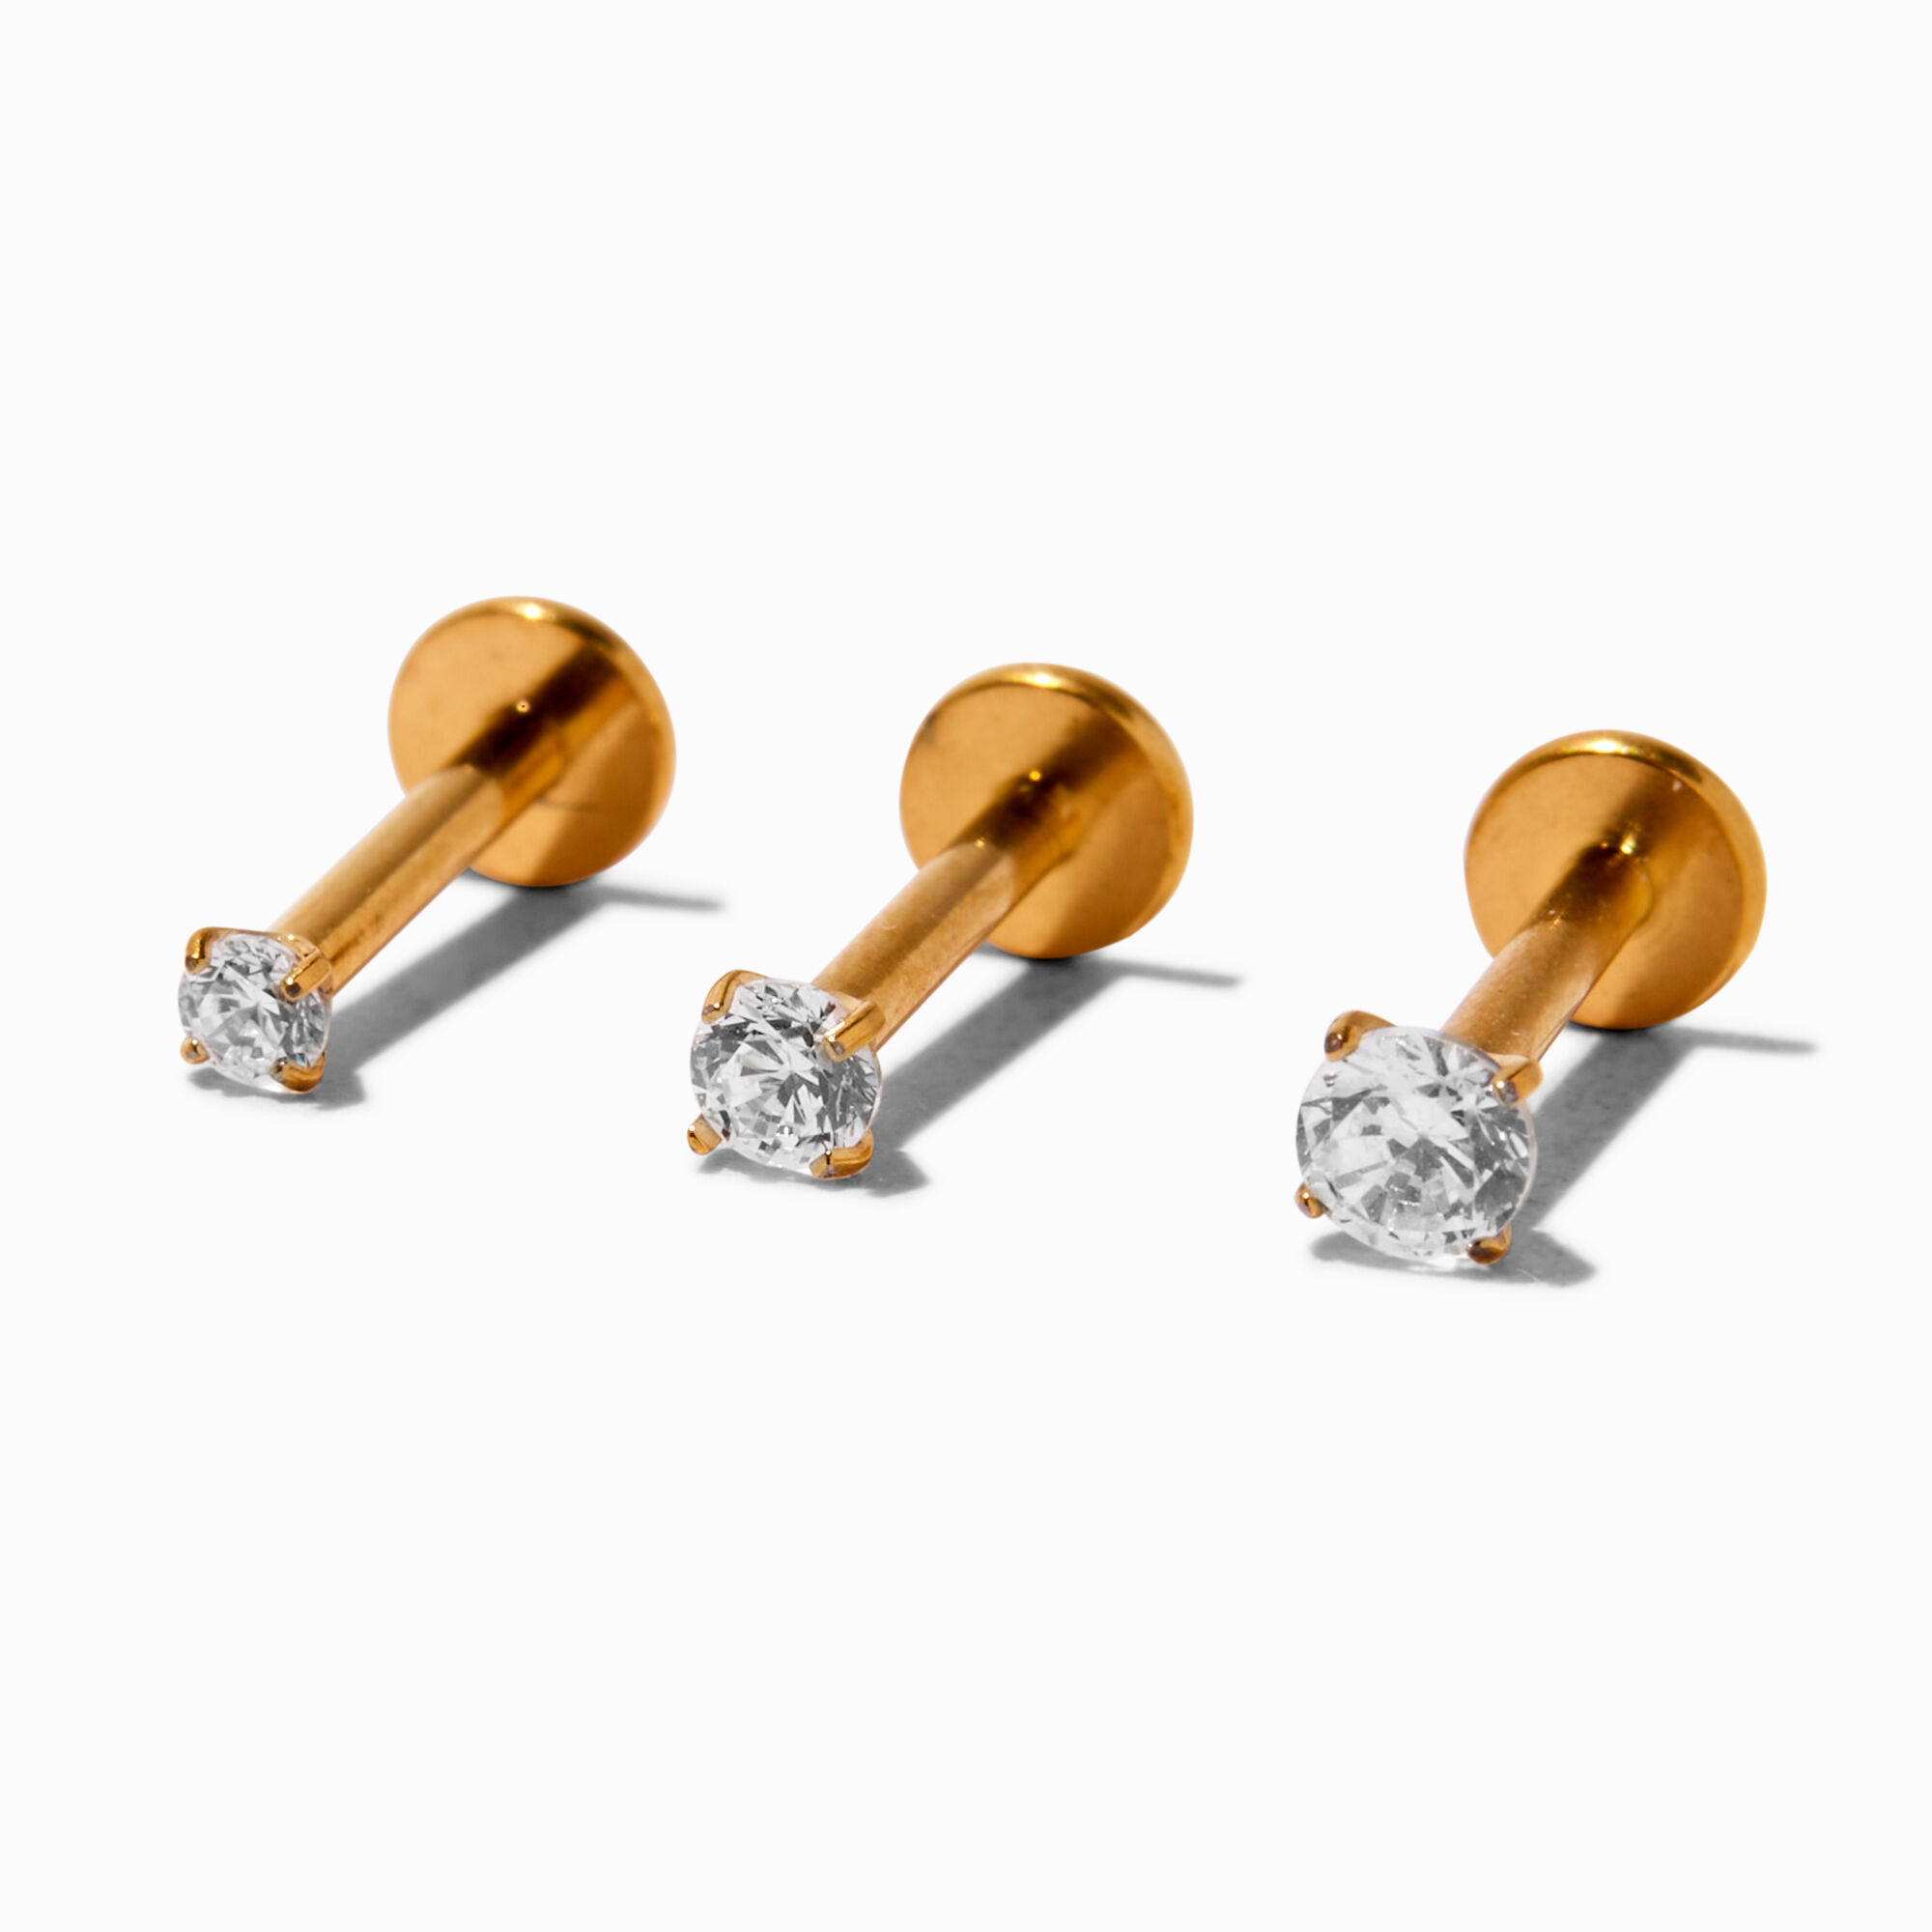 View Claires Tone 16G Crystal Labret Lip Studs 3 Pack Gold information